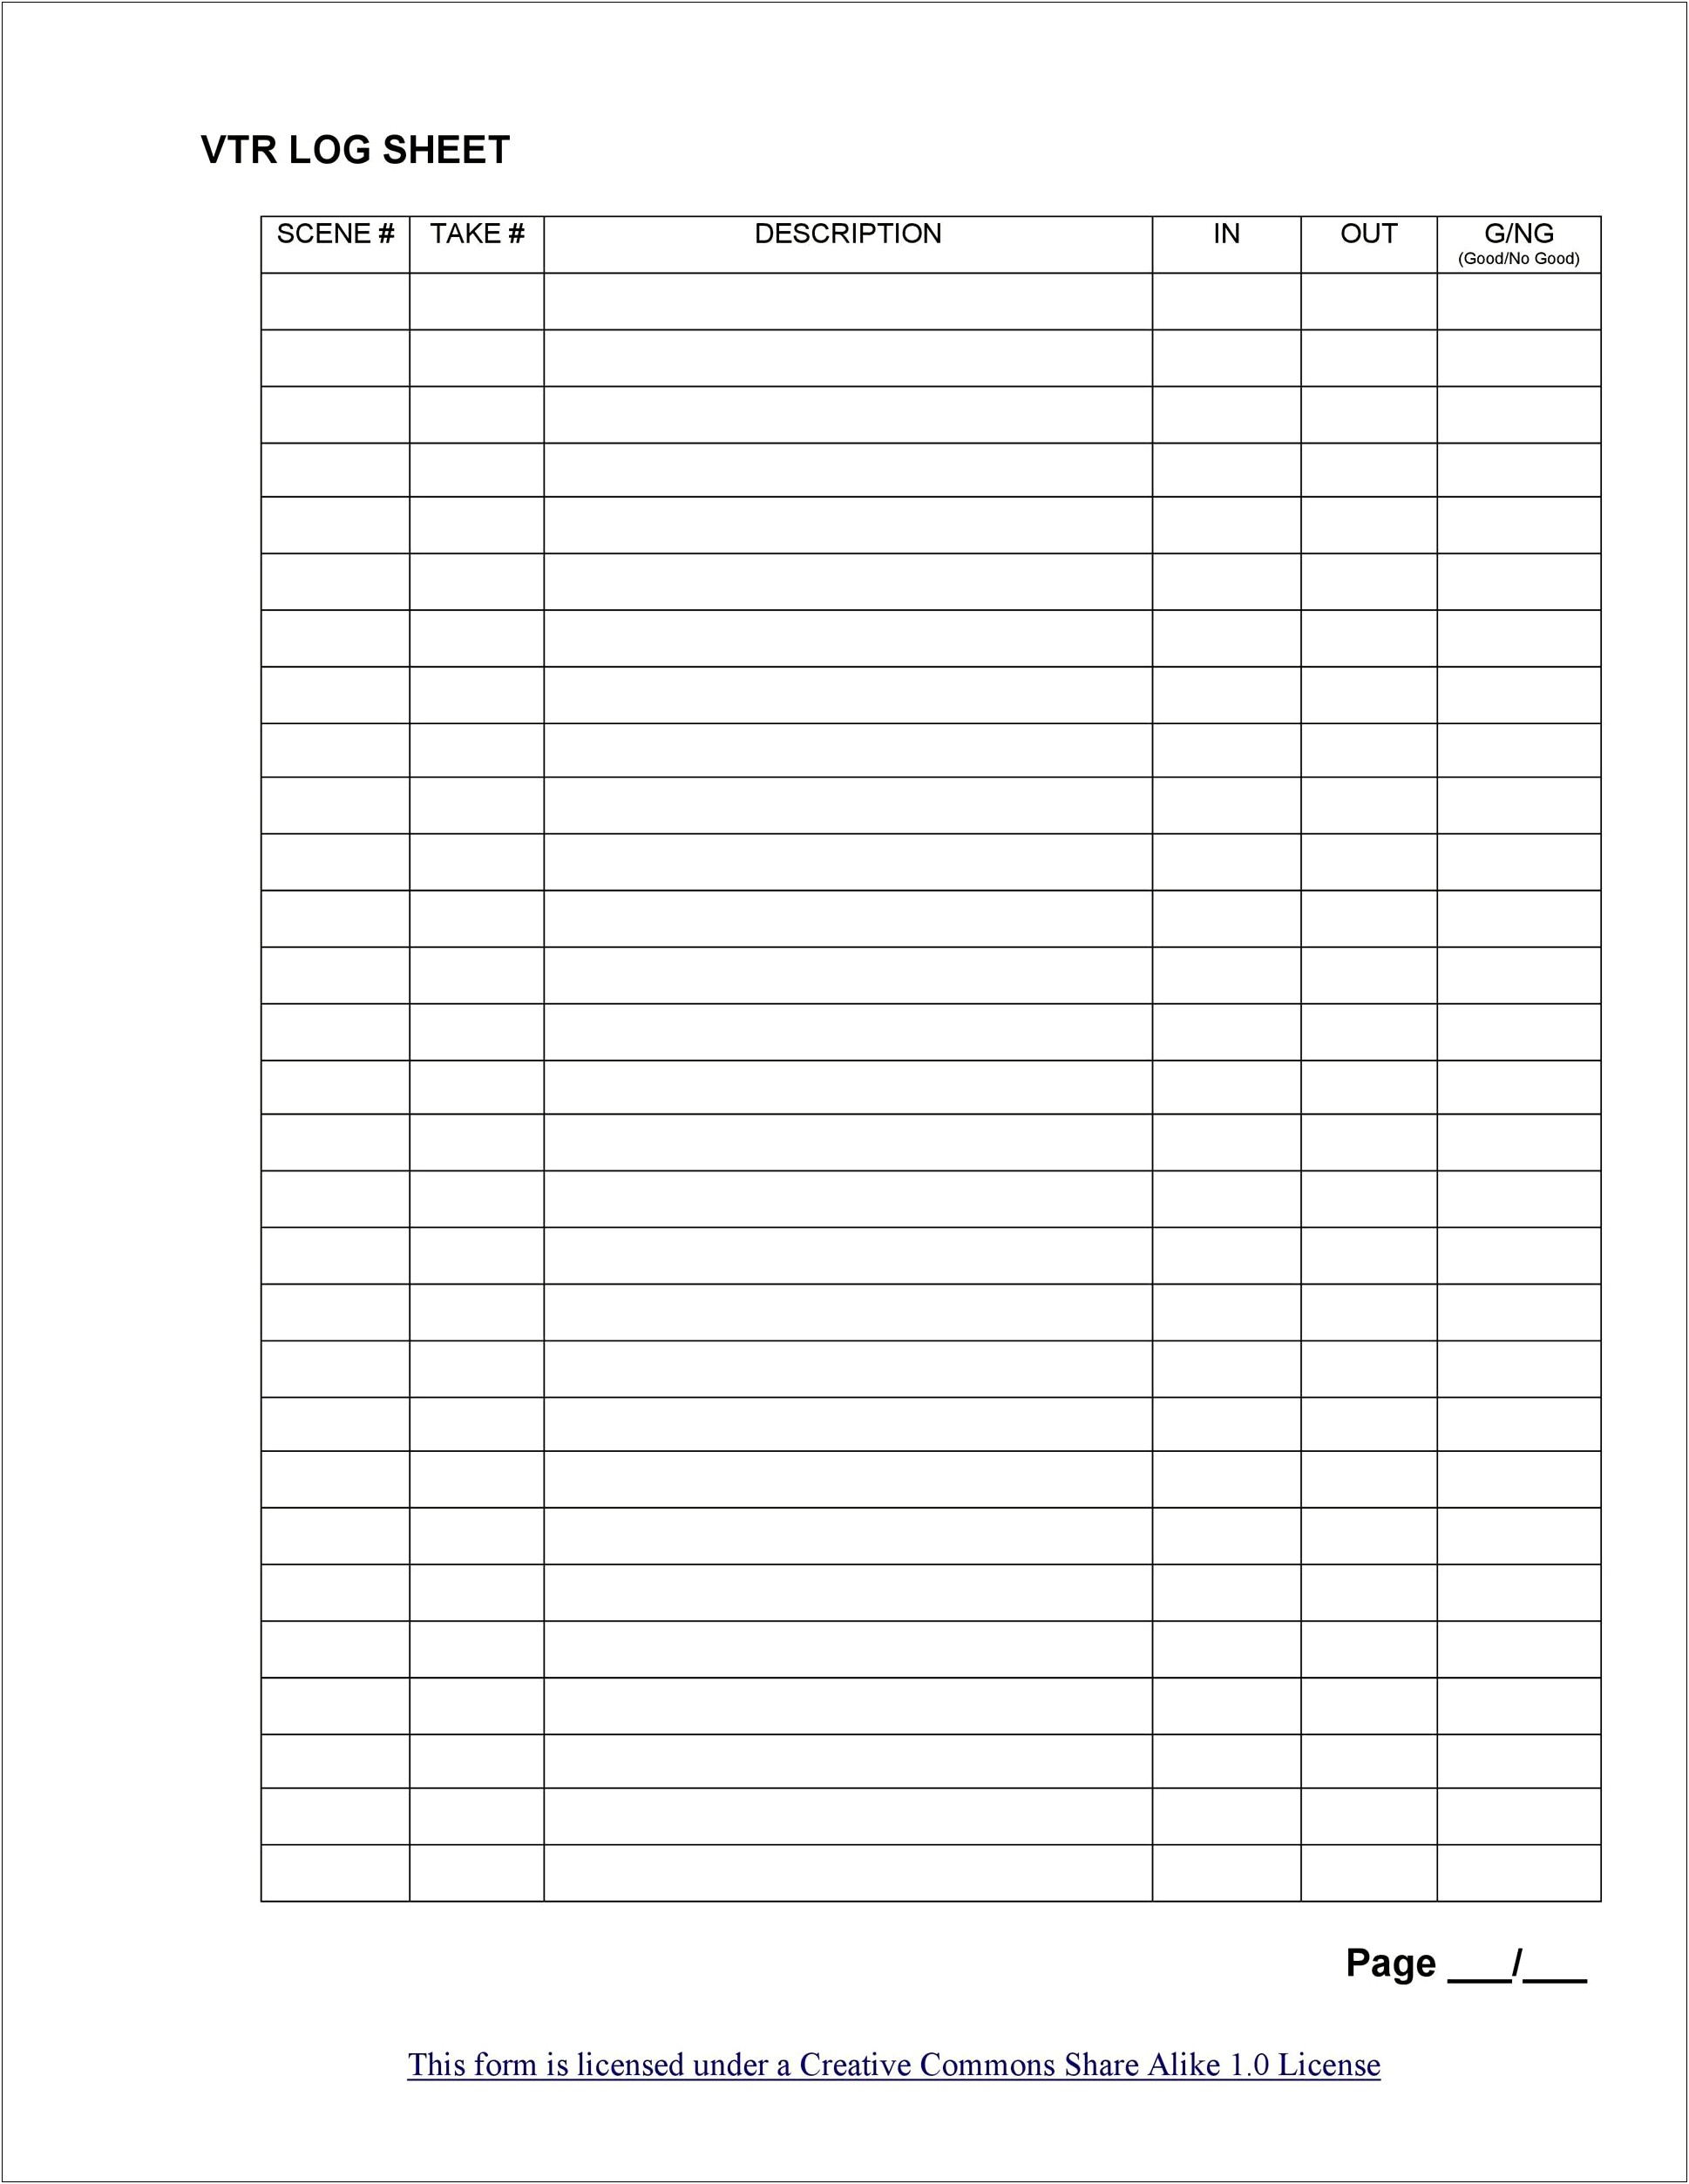 Free Employee Sign In Sheet Template